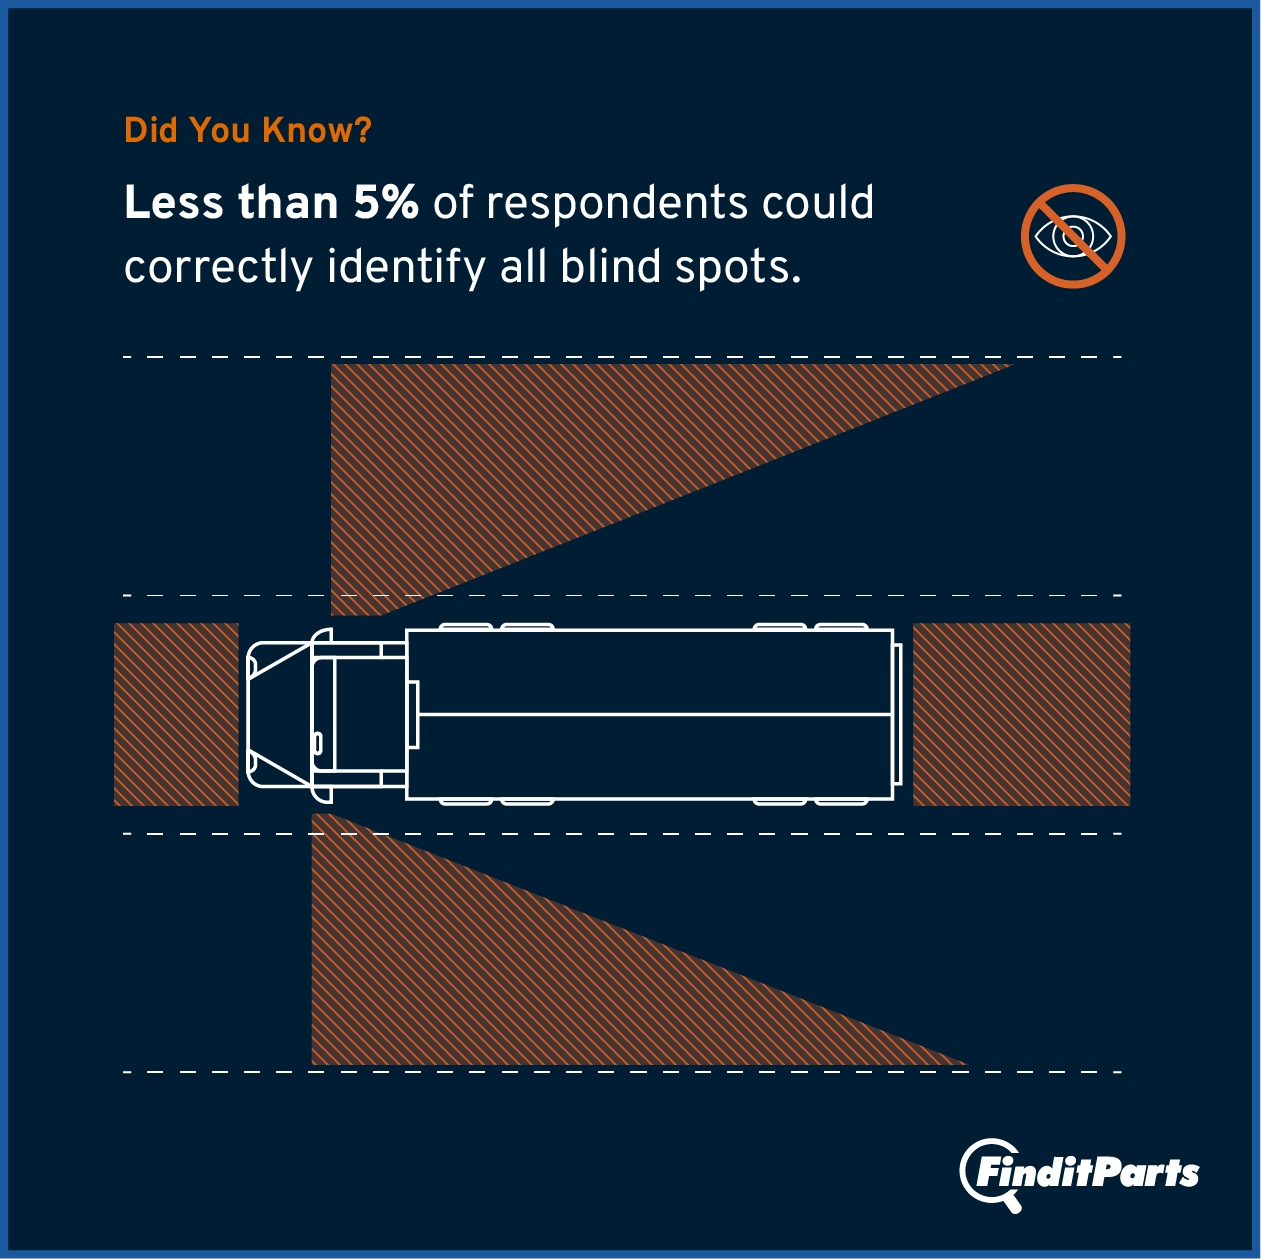 Image showing the 4 semi-truck blind spots: directly in front of the truck, directly behind, and to its right and left